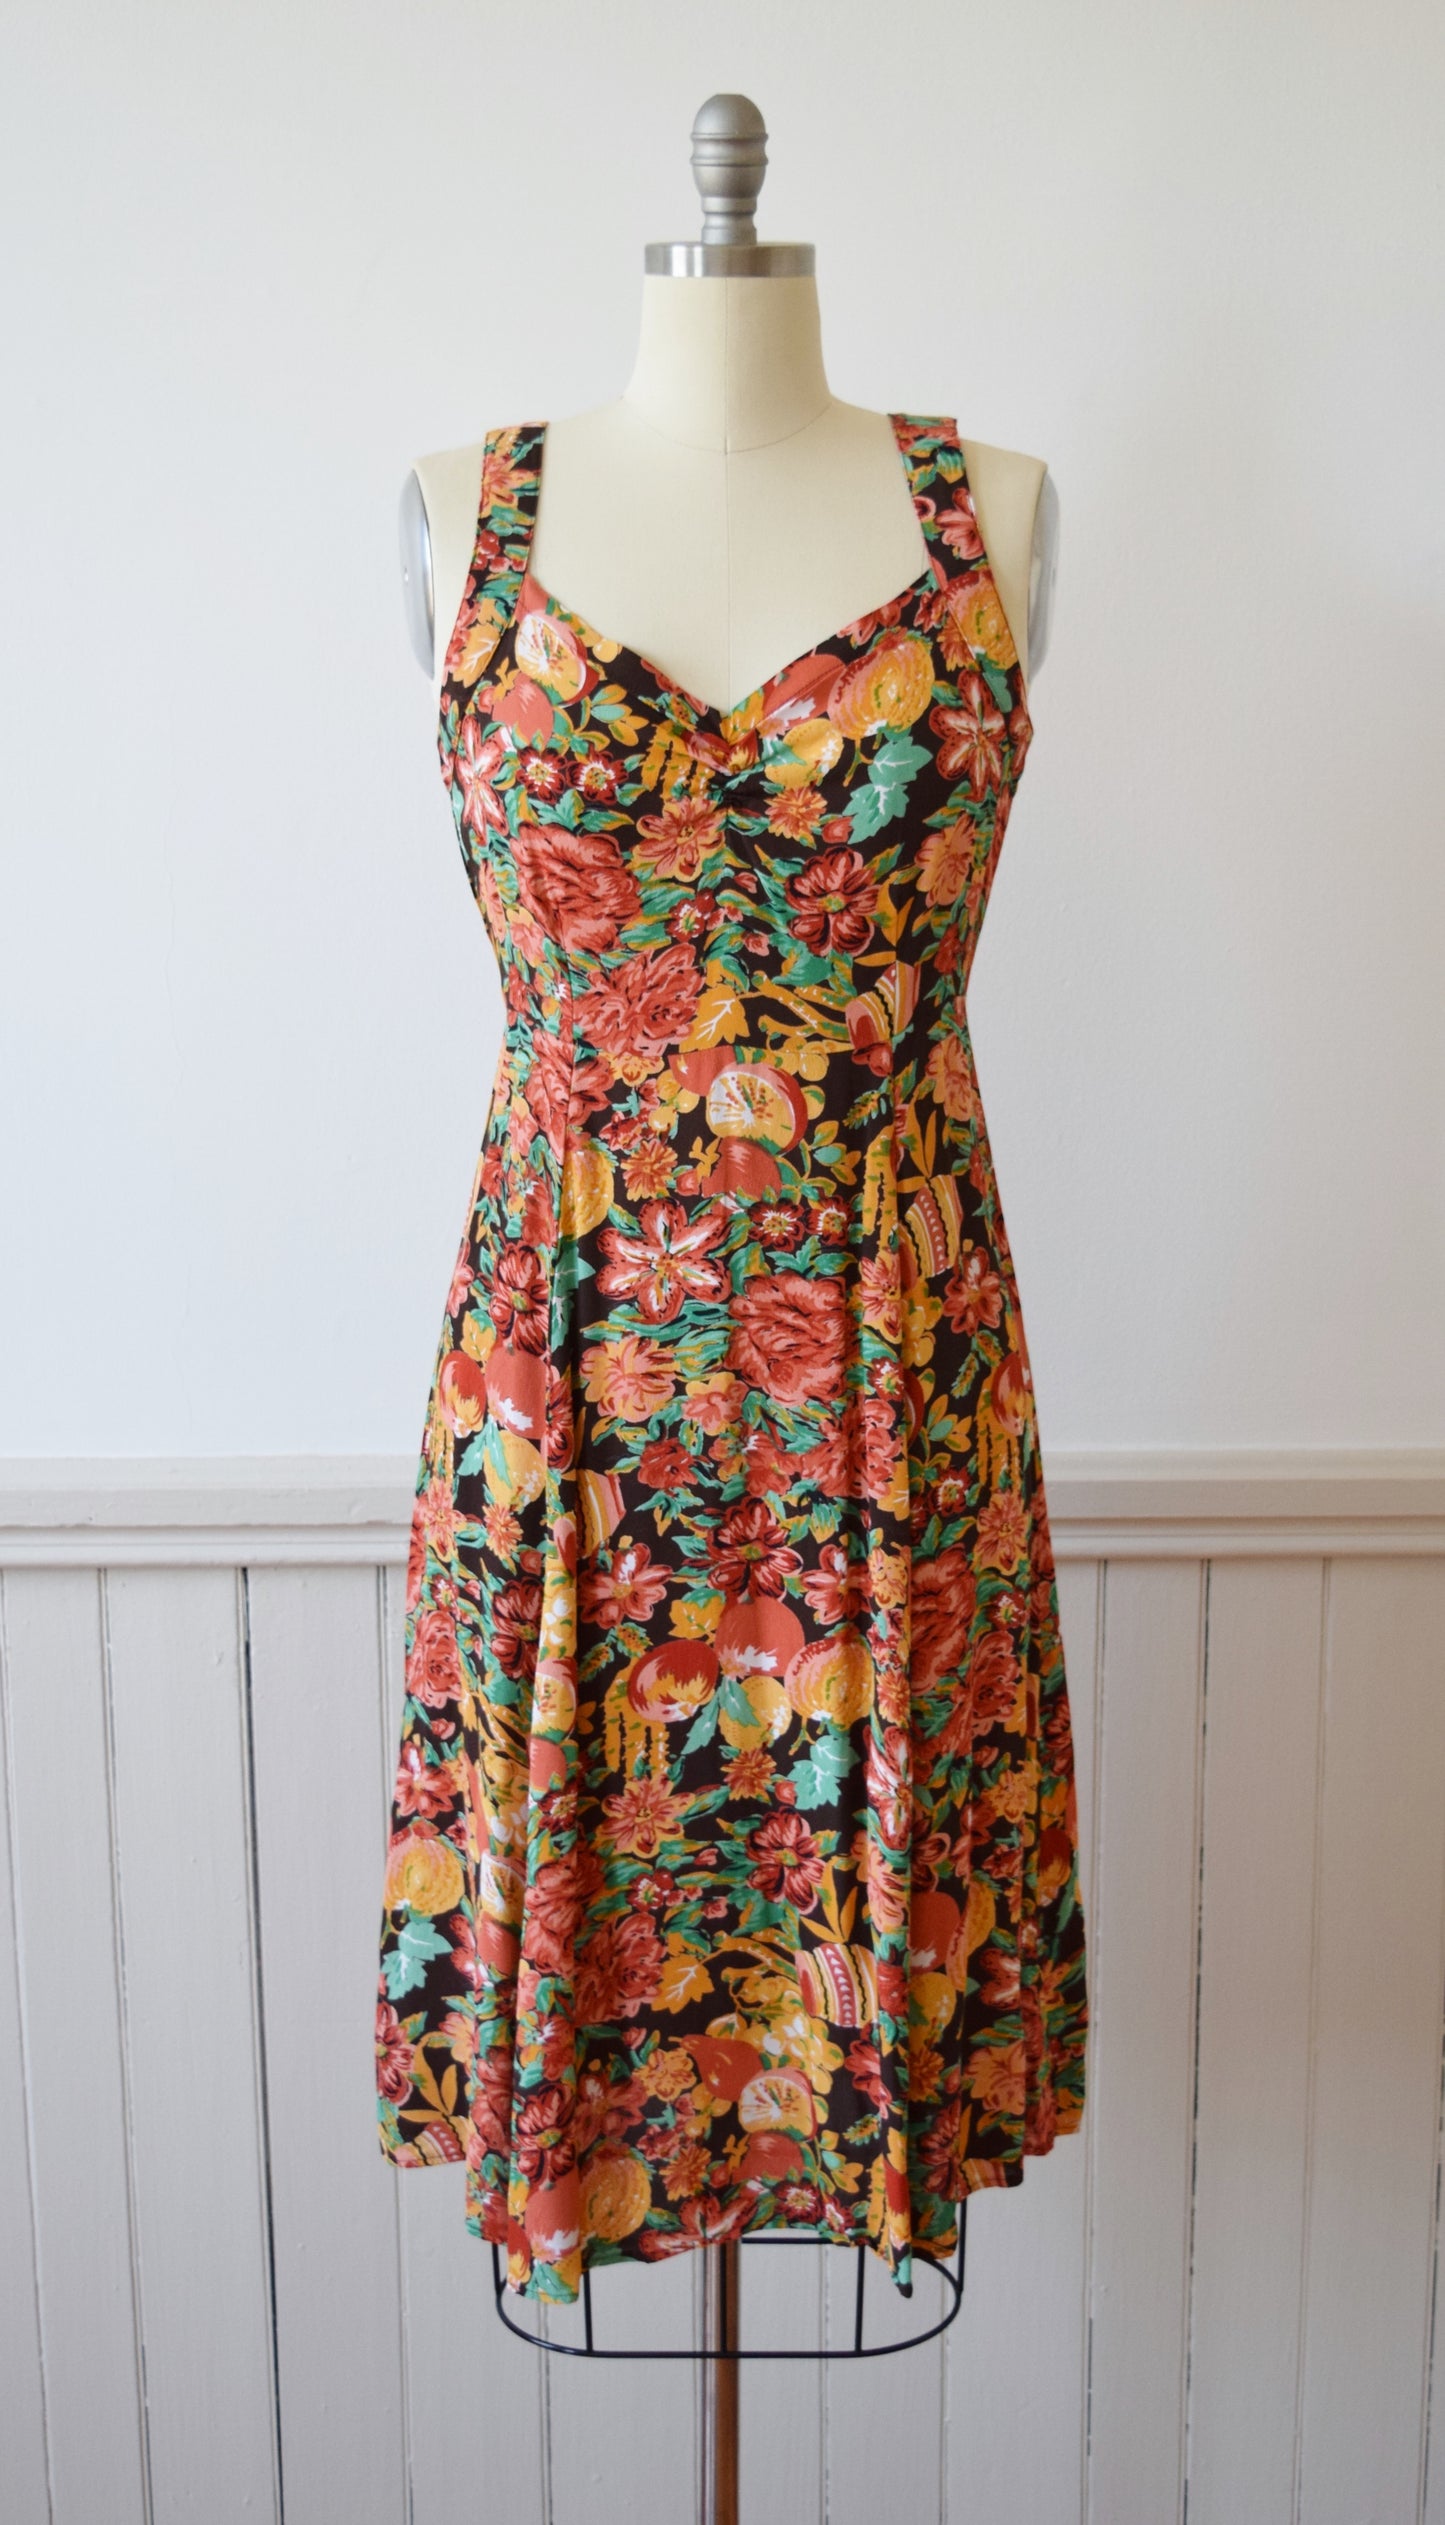 Vintage Repro Novelty Print Fruit and Flowers Sundress by Loco Lindo